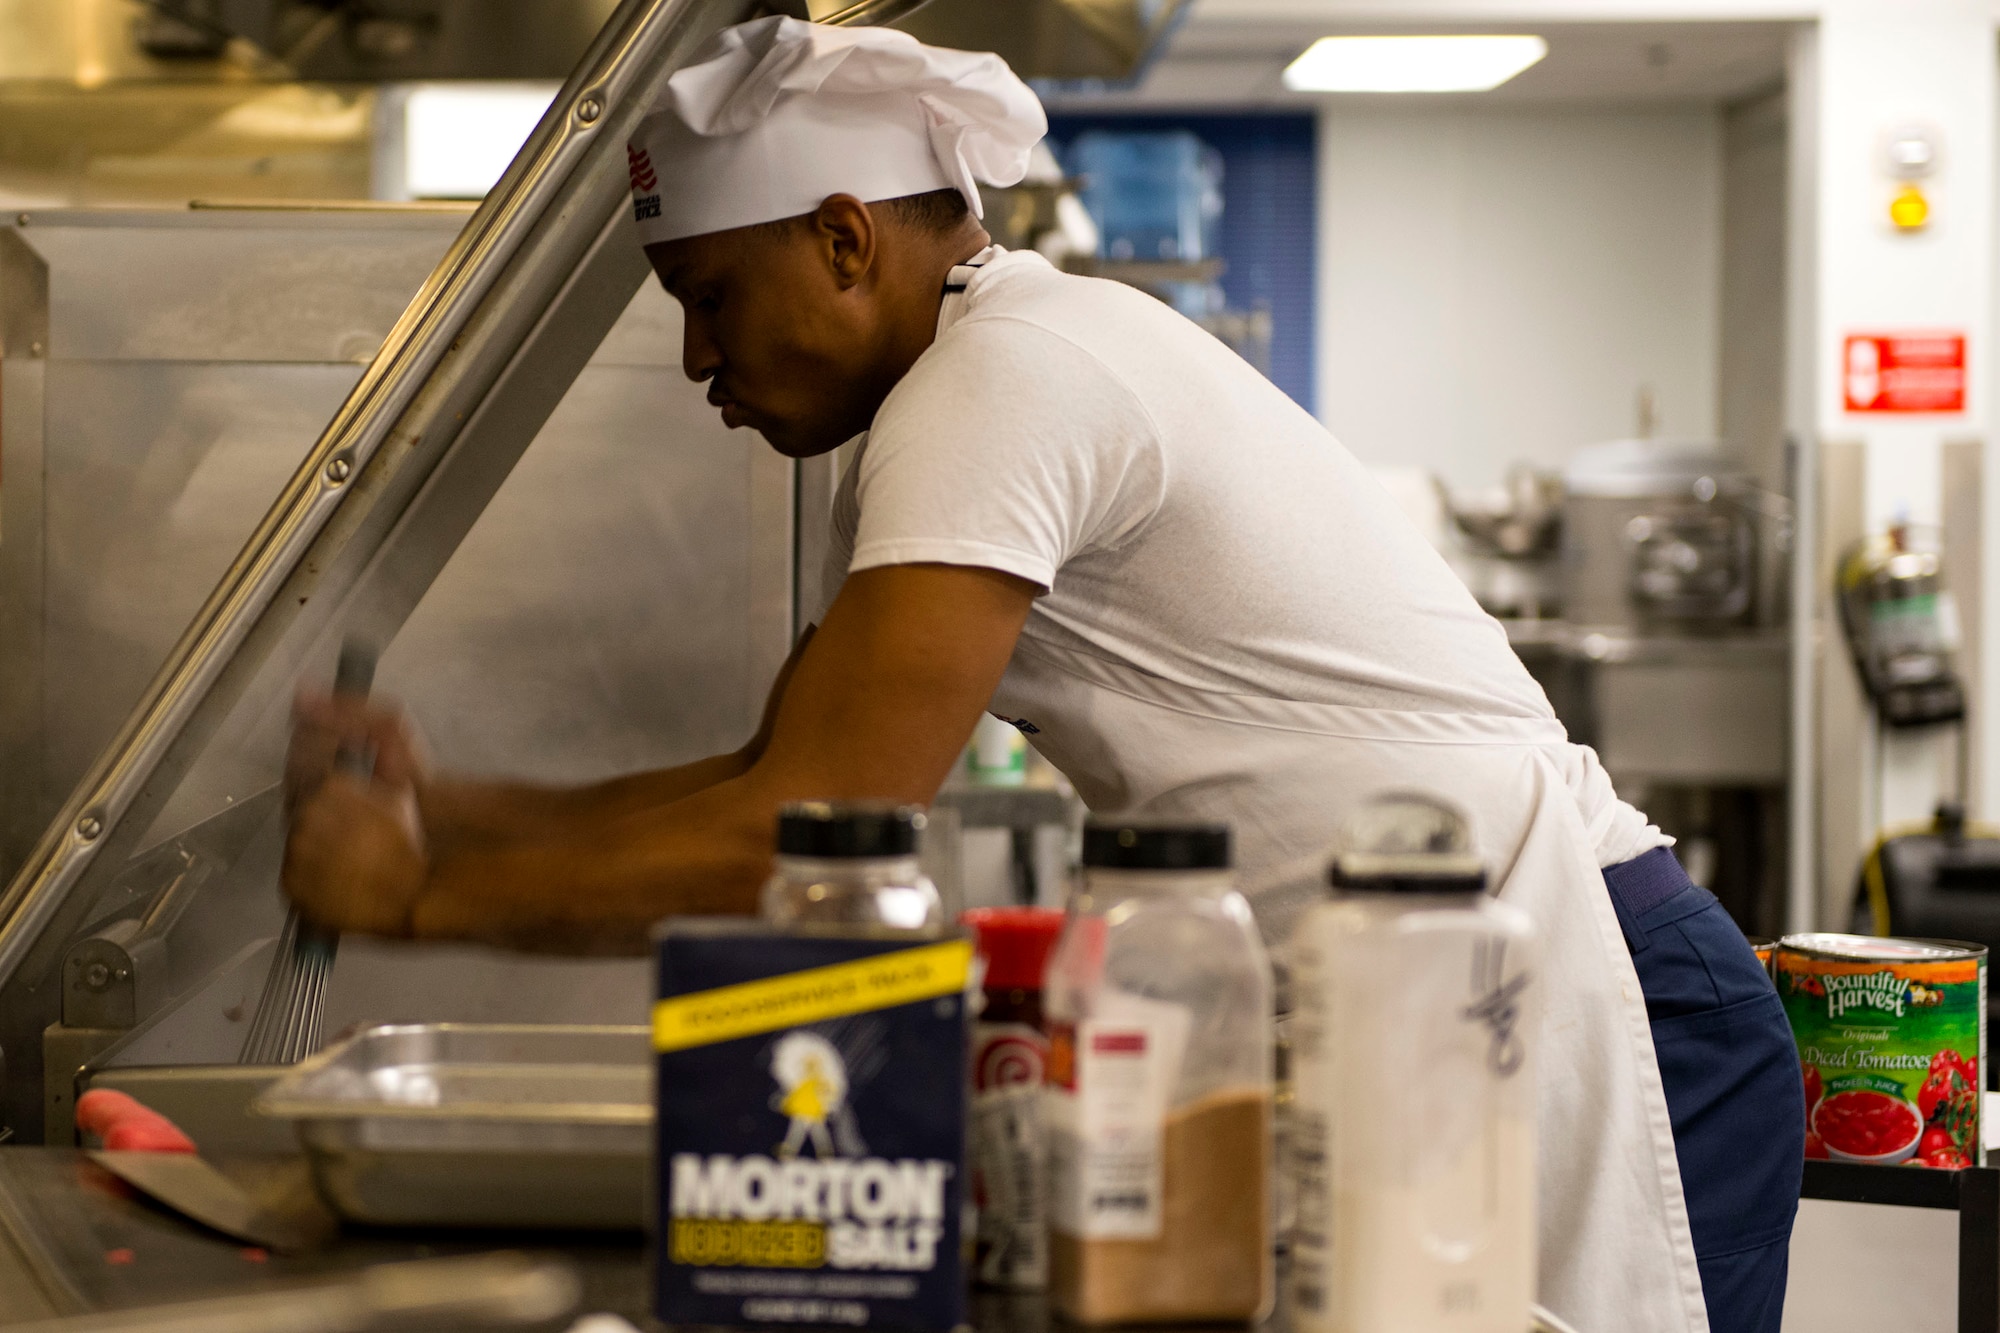 Senior Airman Cameron Morrow, 23d Force Support Squadron food services journeyman, whisks ground beef for pasta sauce in the Georgia Pines Dining Facility (DFAC), Dec. 12, 2017, at Moody Air Force Base, Ga. Through teamwork, adaption and striving for excellence, the Georgia Pines DFAC Airmen are able to ensure Team Moody is fed and ready to finish the fight. (U.S. Air Force Base photo by Airman 1st Class Erick Requadt)